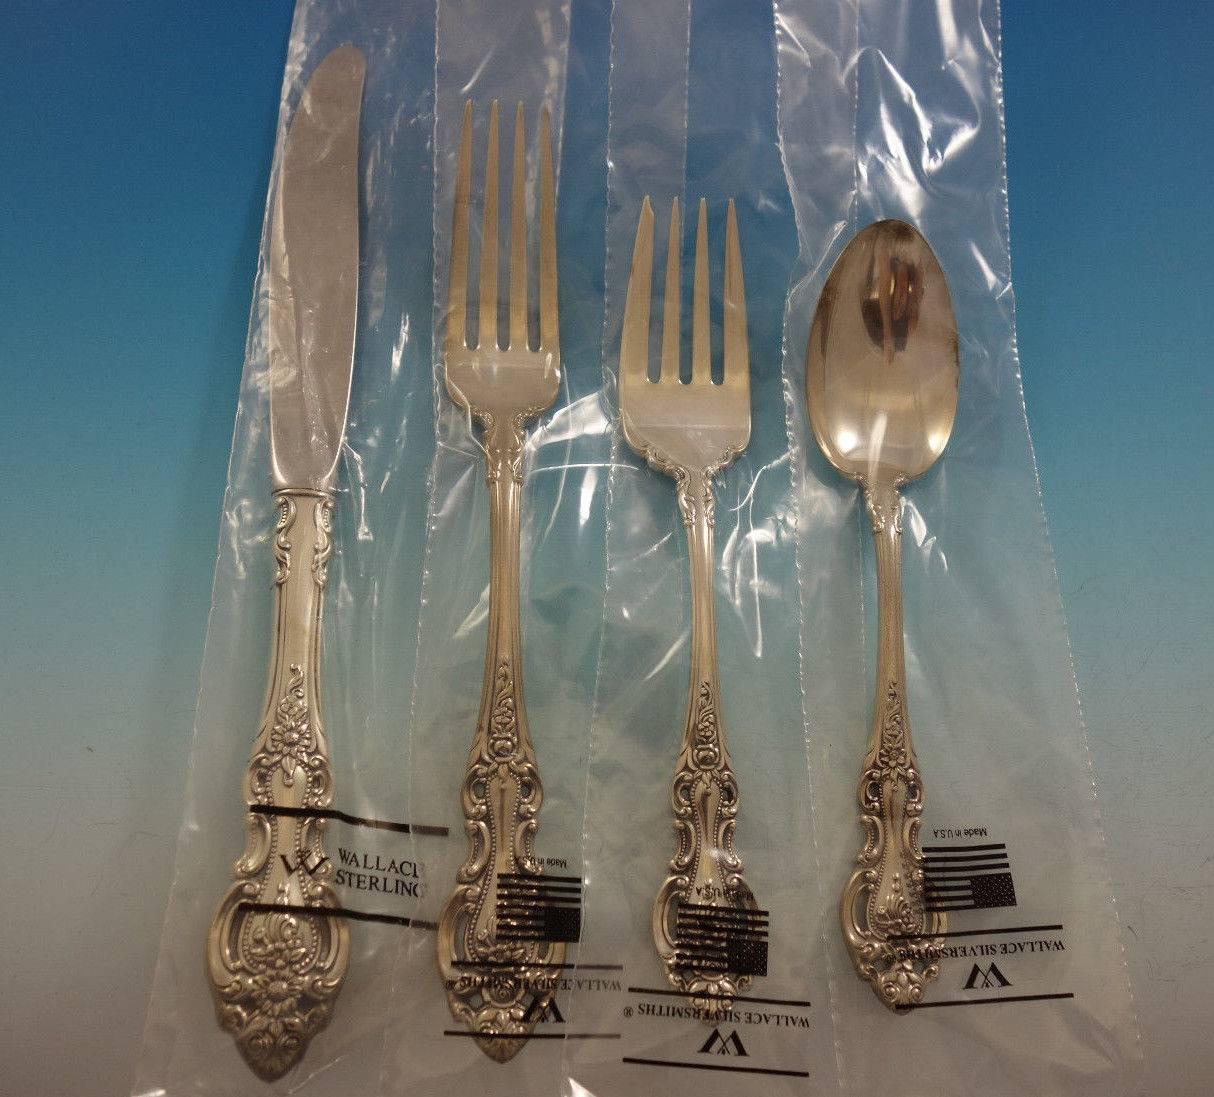 New Grand Victorian by Wallace sterling silver flatware set - 48 pieces. This set includes: 12 knives, 9